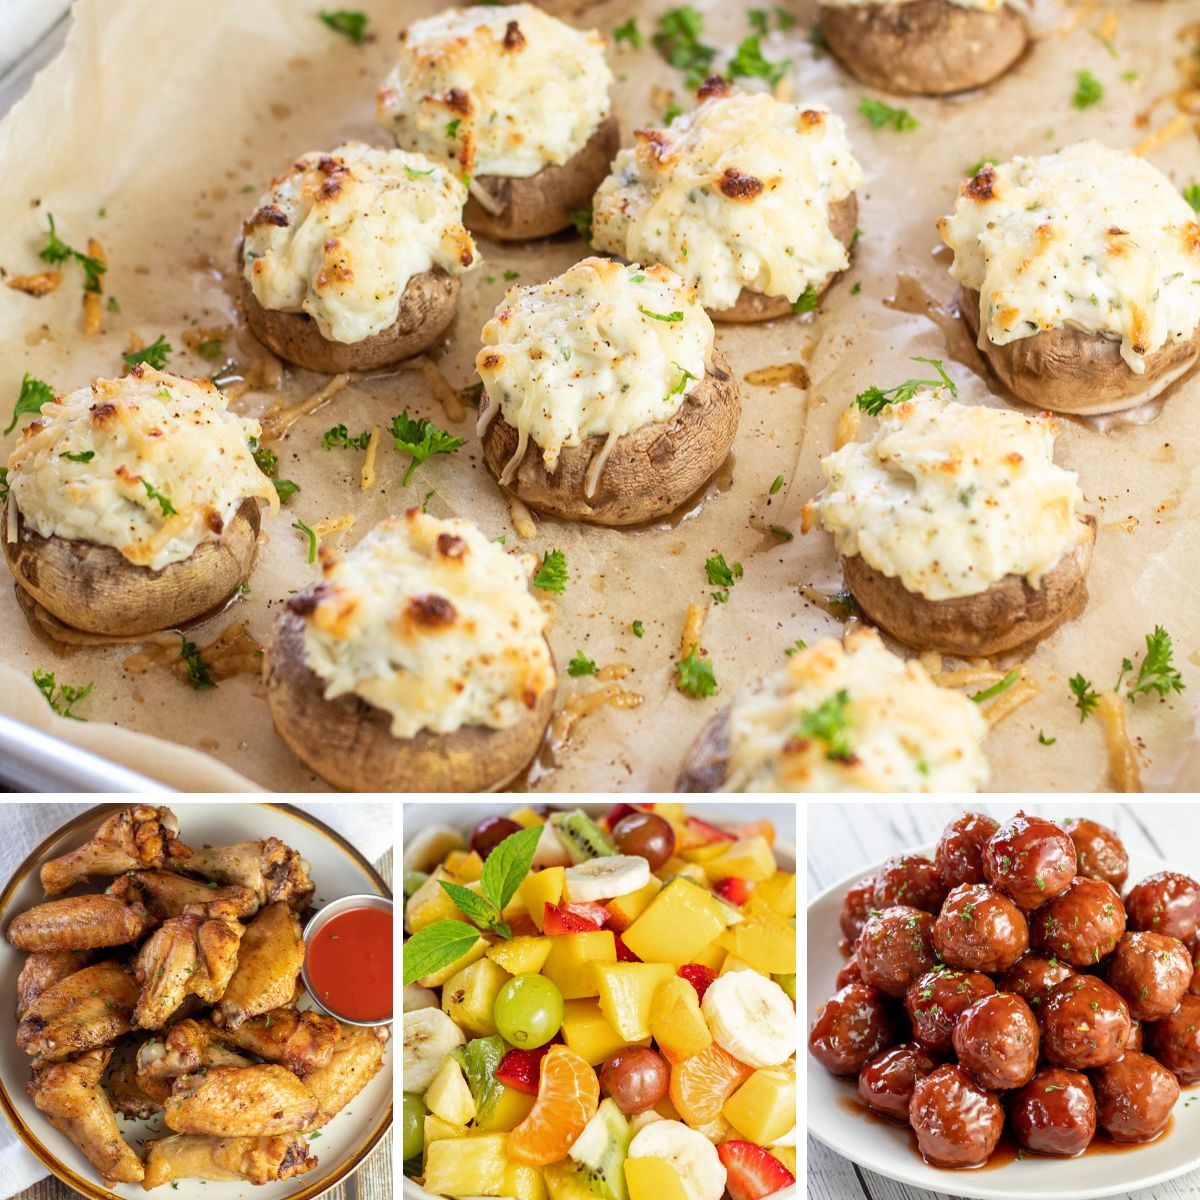 Tasty, easy-to-make 4th of July appetizers featuring 4 recipe images in a collage.